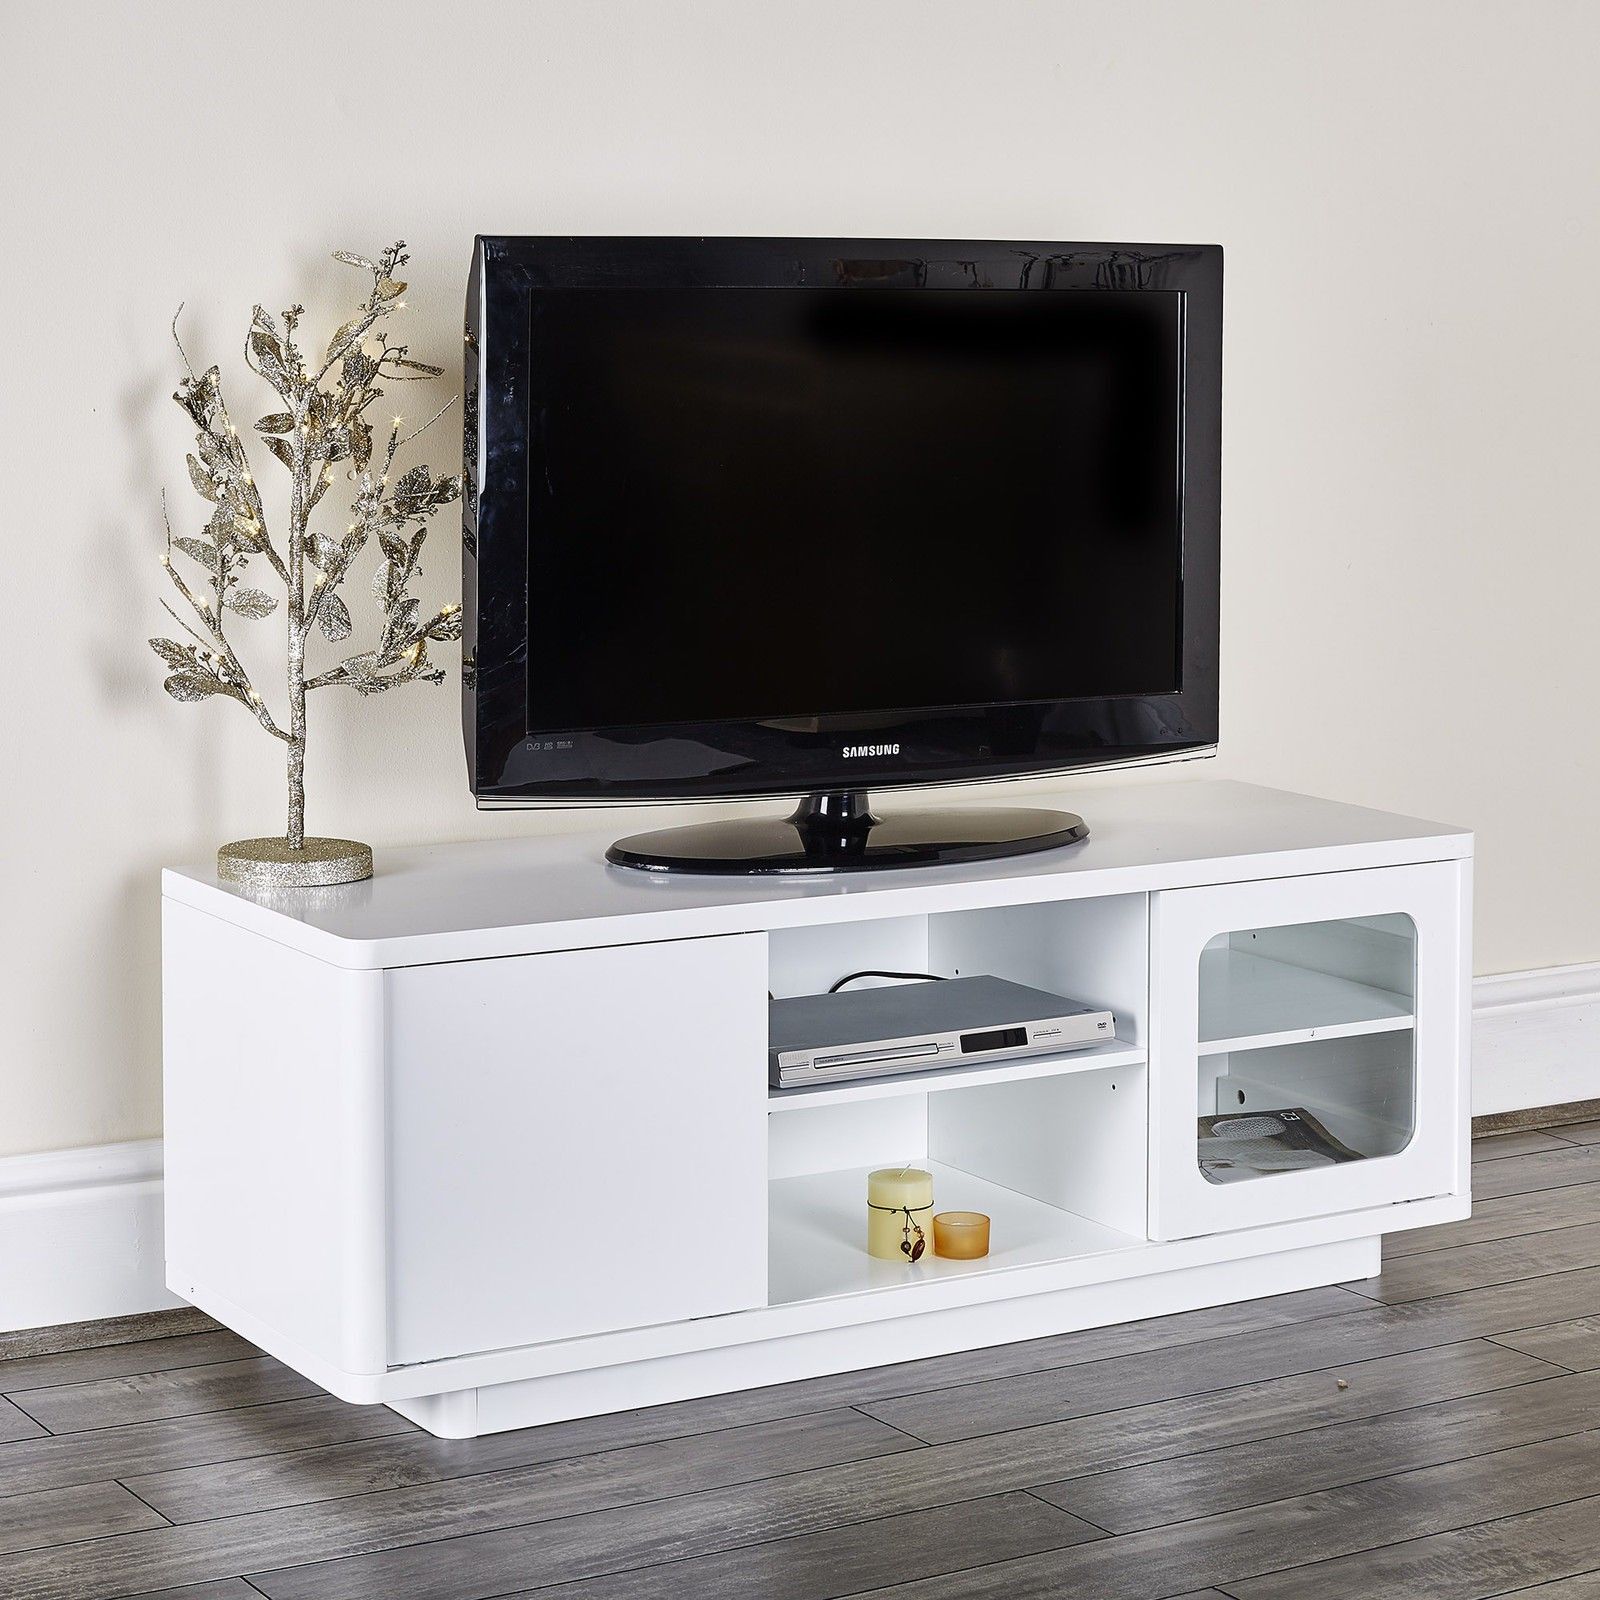 Modern White Tv Entertainment Unit Abreo Home Furniture Intended For White Tv Stand Modern (View 8 of 15)